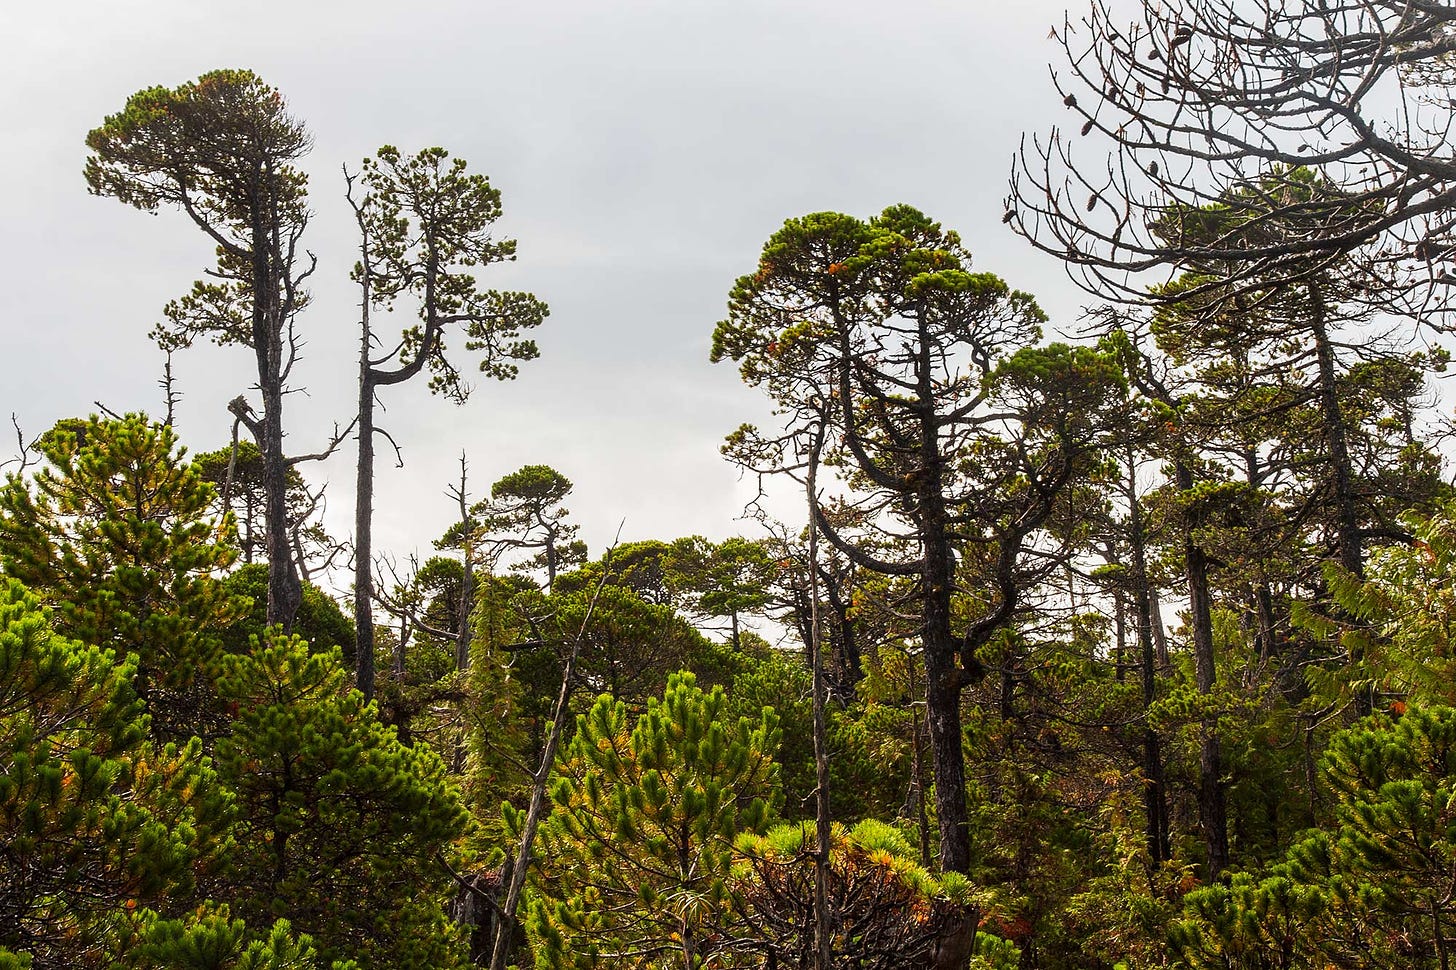 on drier land, the shore pines aren't quite as stunted, but their shapes are still sculptural with curving arms and tufts of bright green foliage